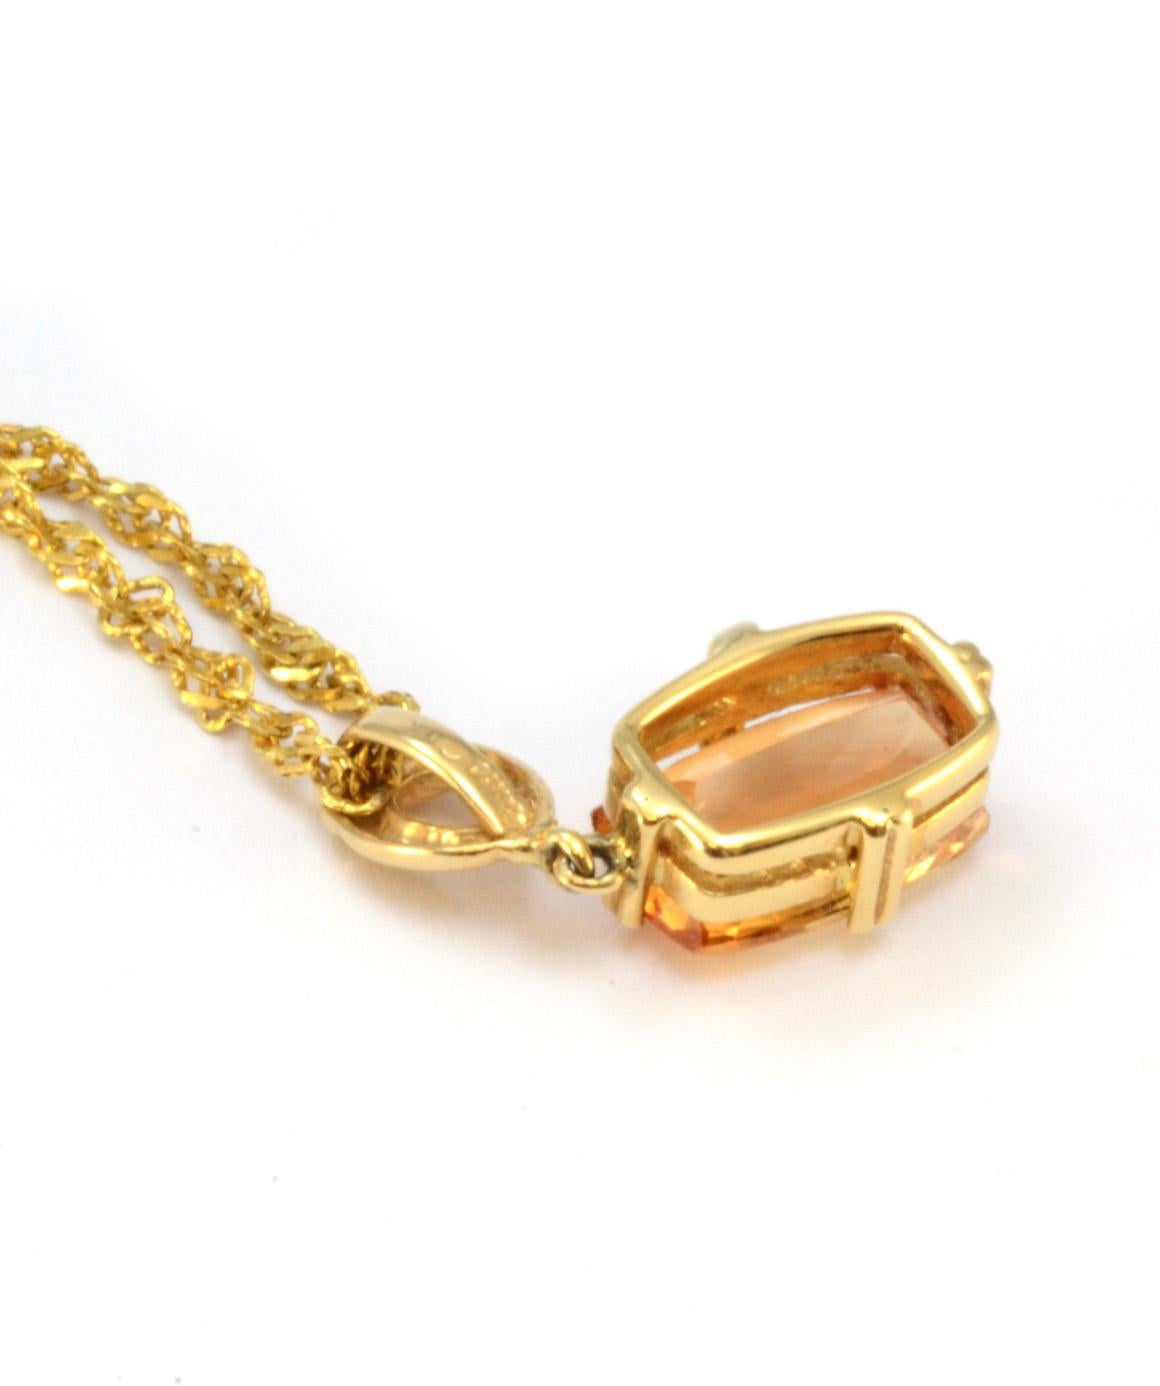 Women's or Men's Solid 14 Karat Yellow Gold Imperial Topaz Necklace